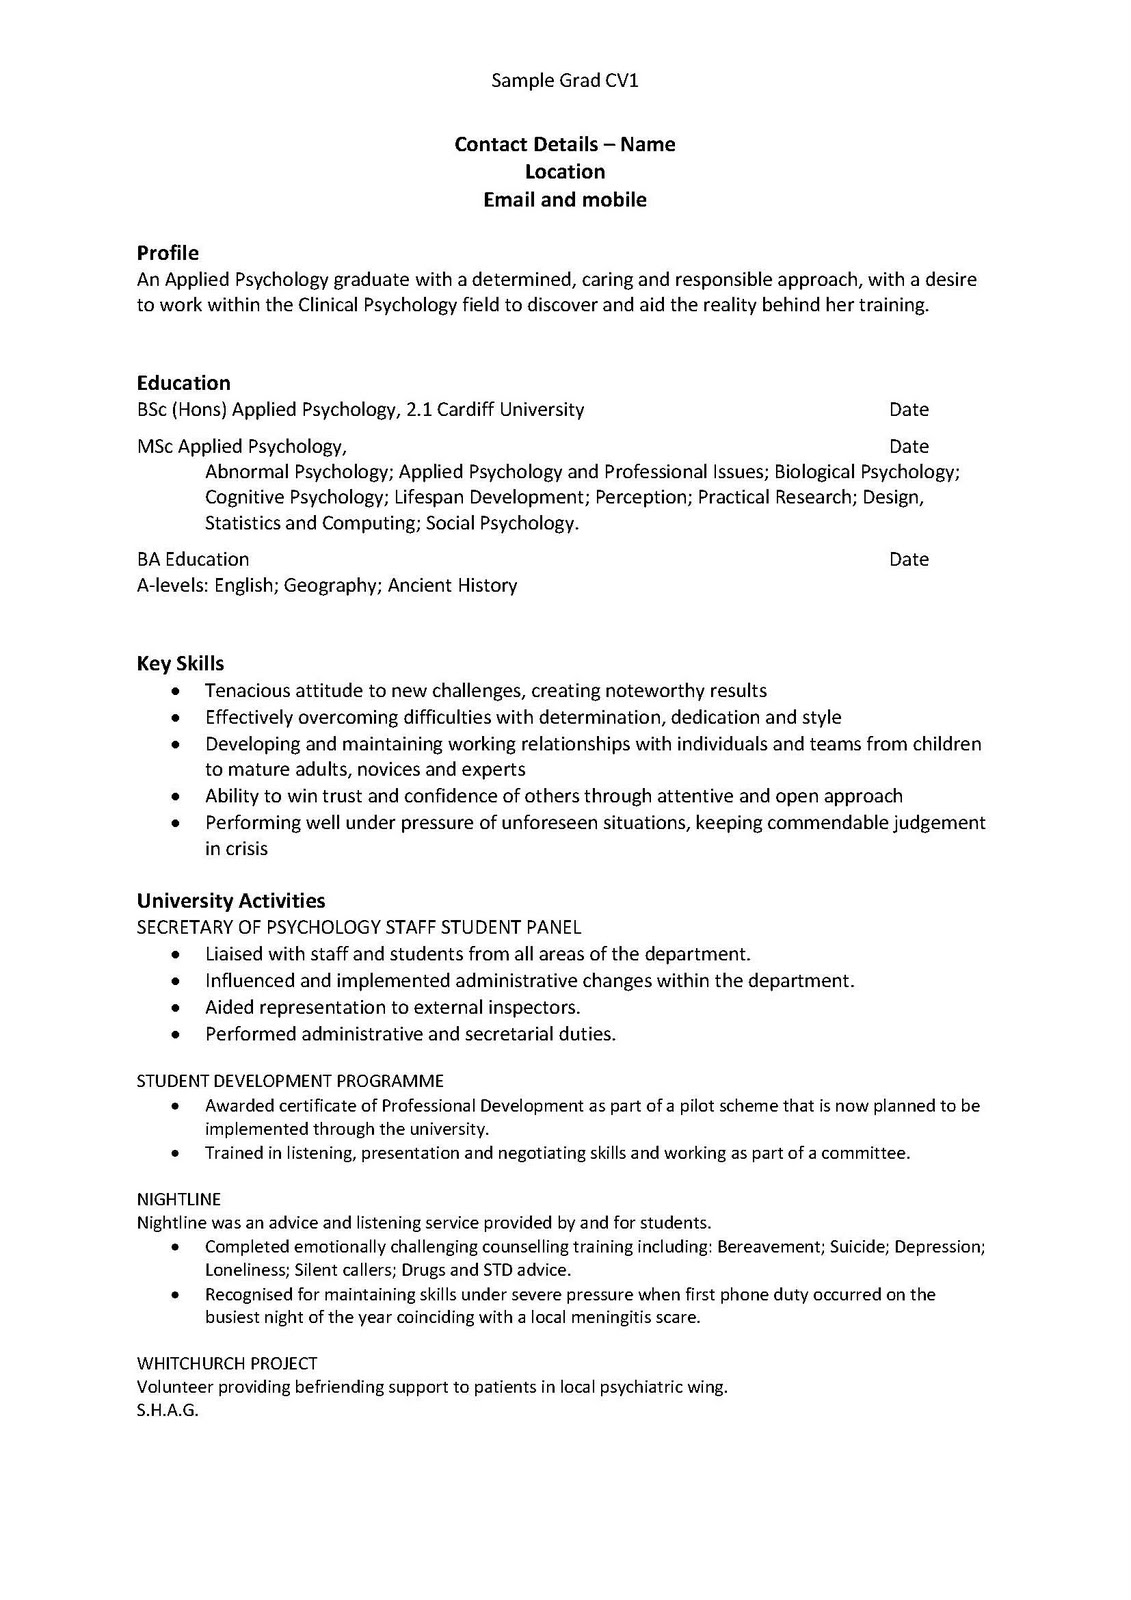 Guide to resume